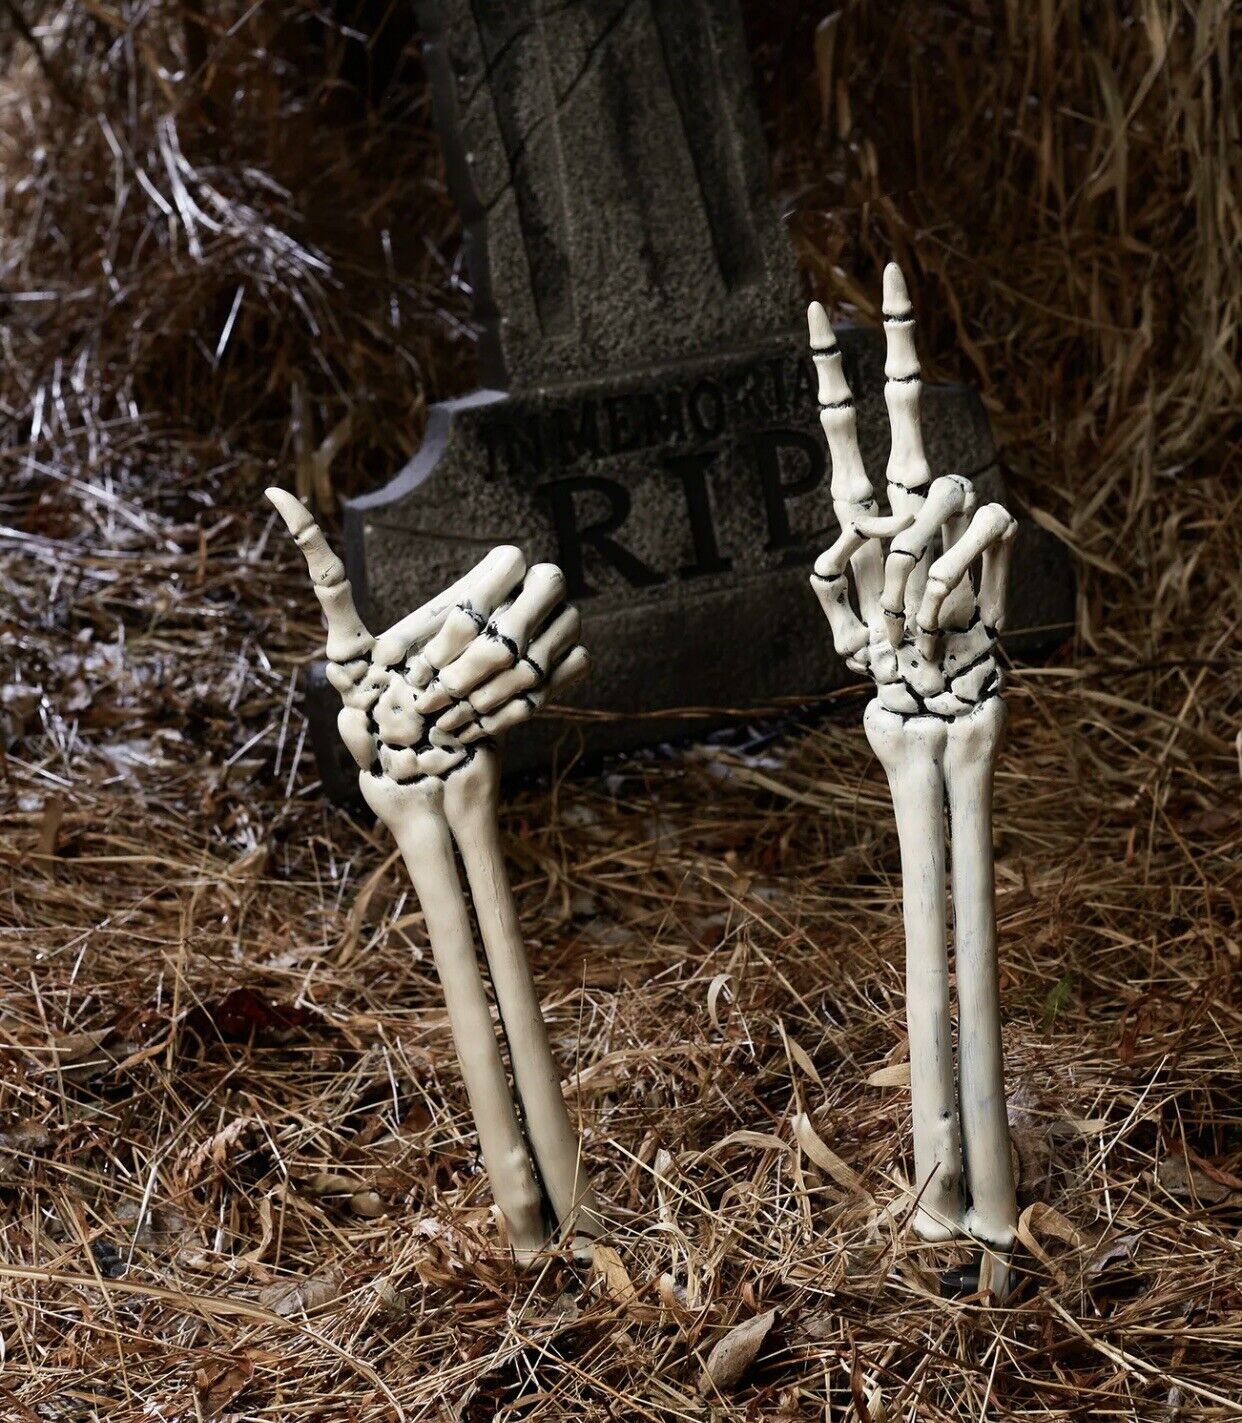 Grave Greetings Thumbs Up Peace Skeleton Hand Halloween Yard Decoration Prop NEW